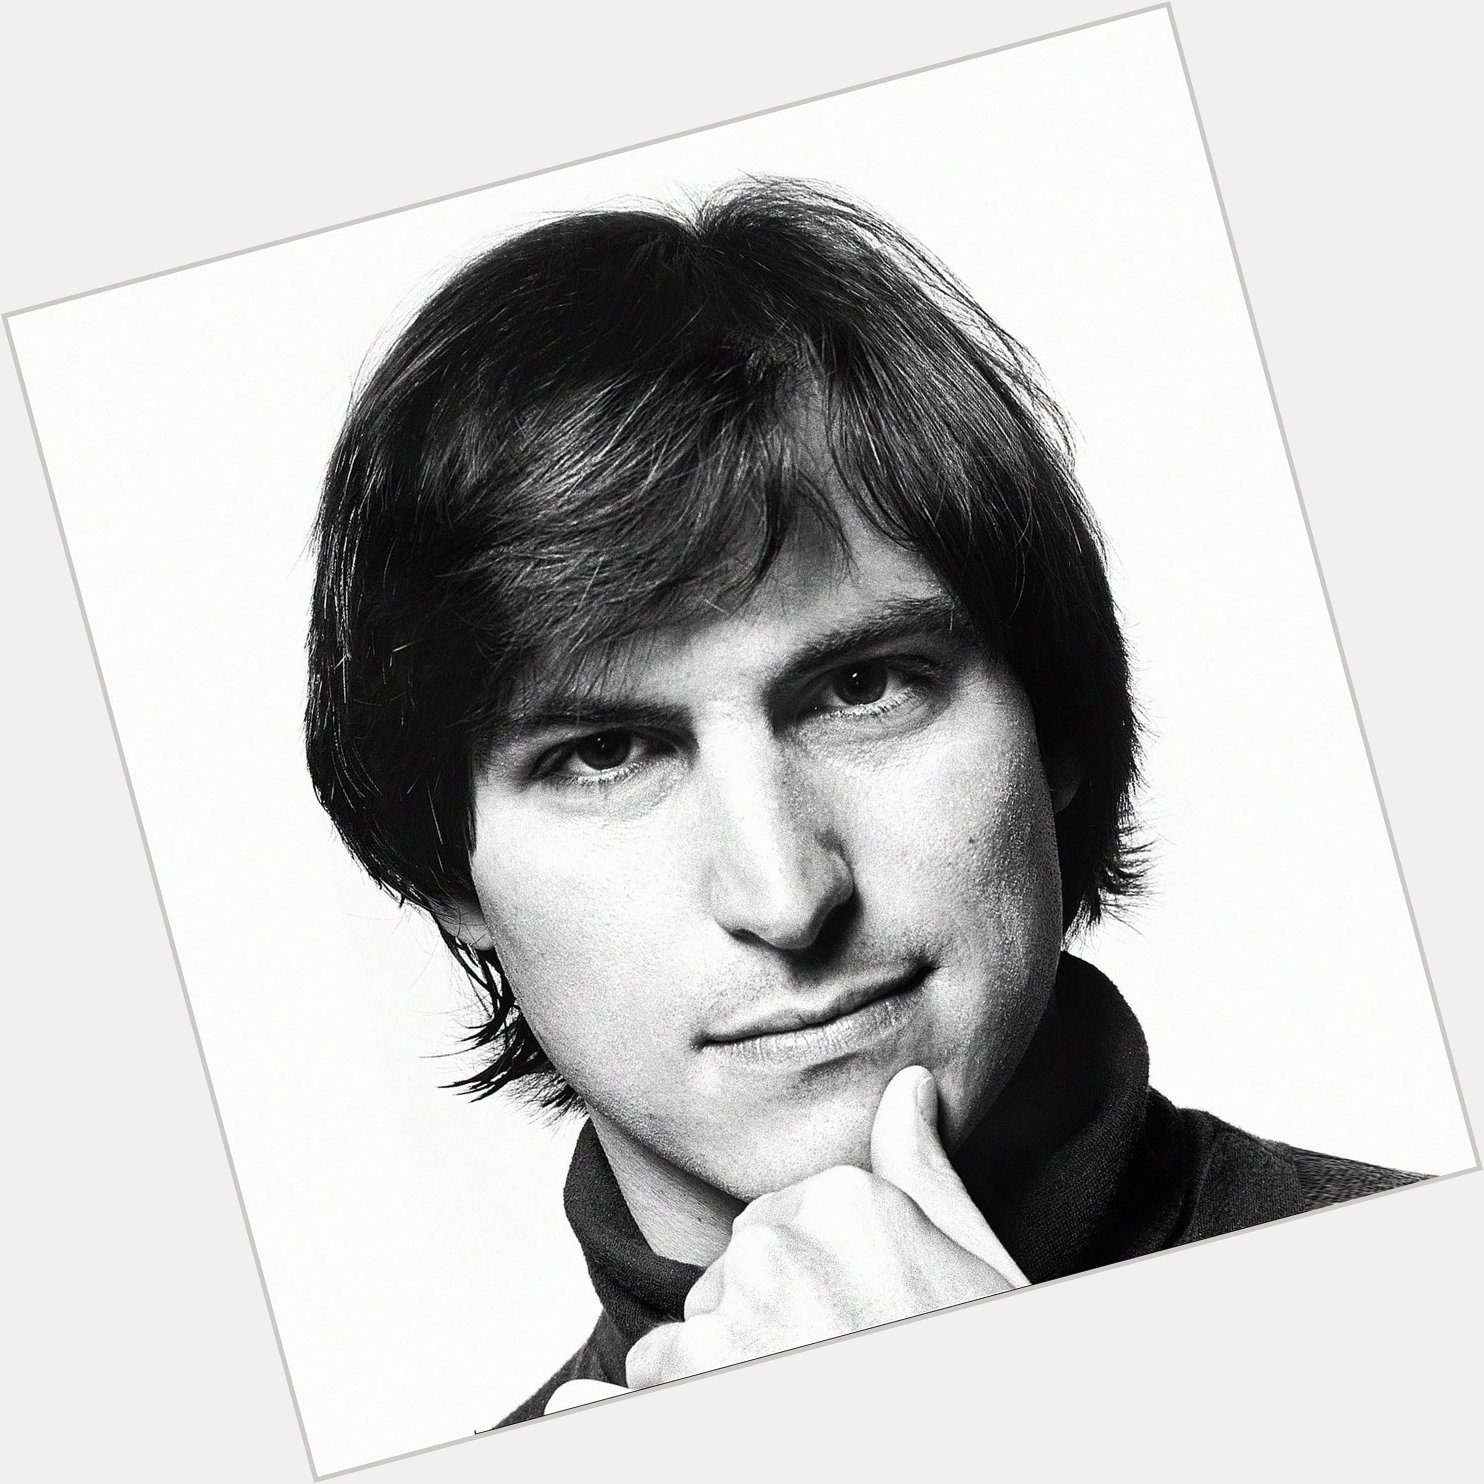 Steve Jobs would\ve turned 67 today. Happy Birthday to the legend!   